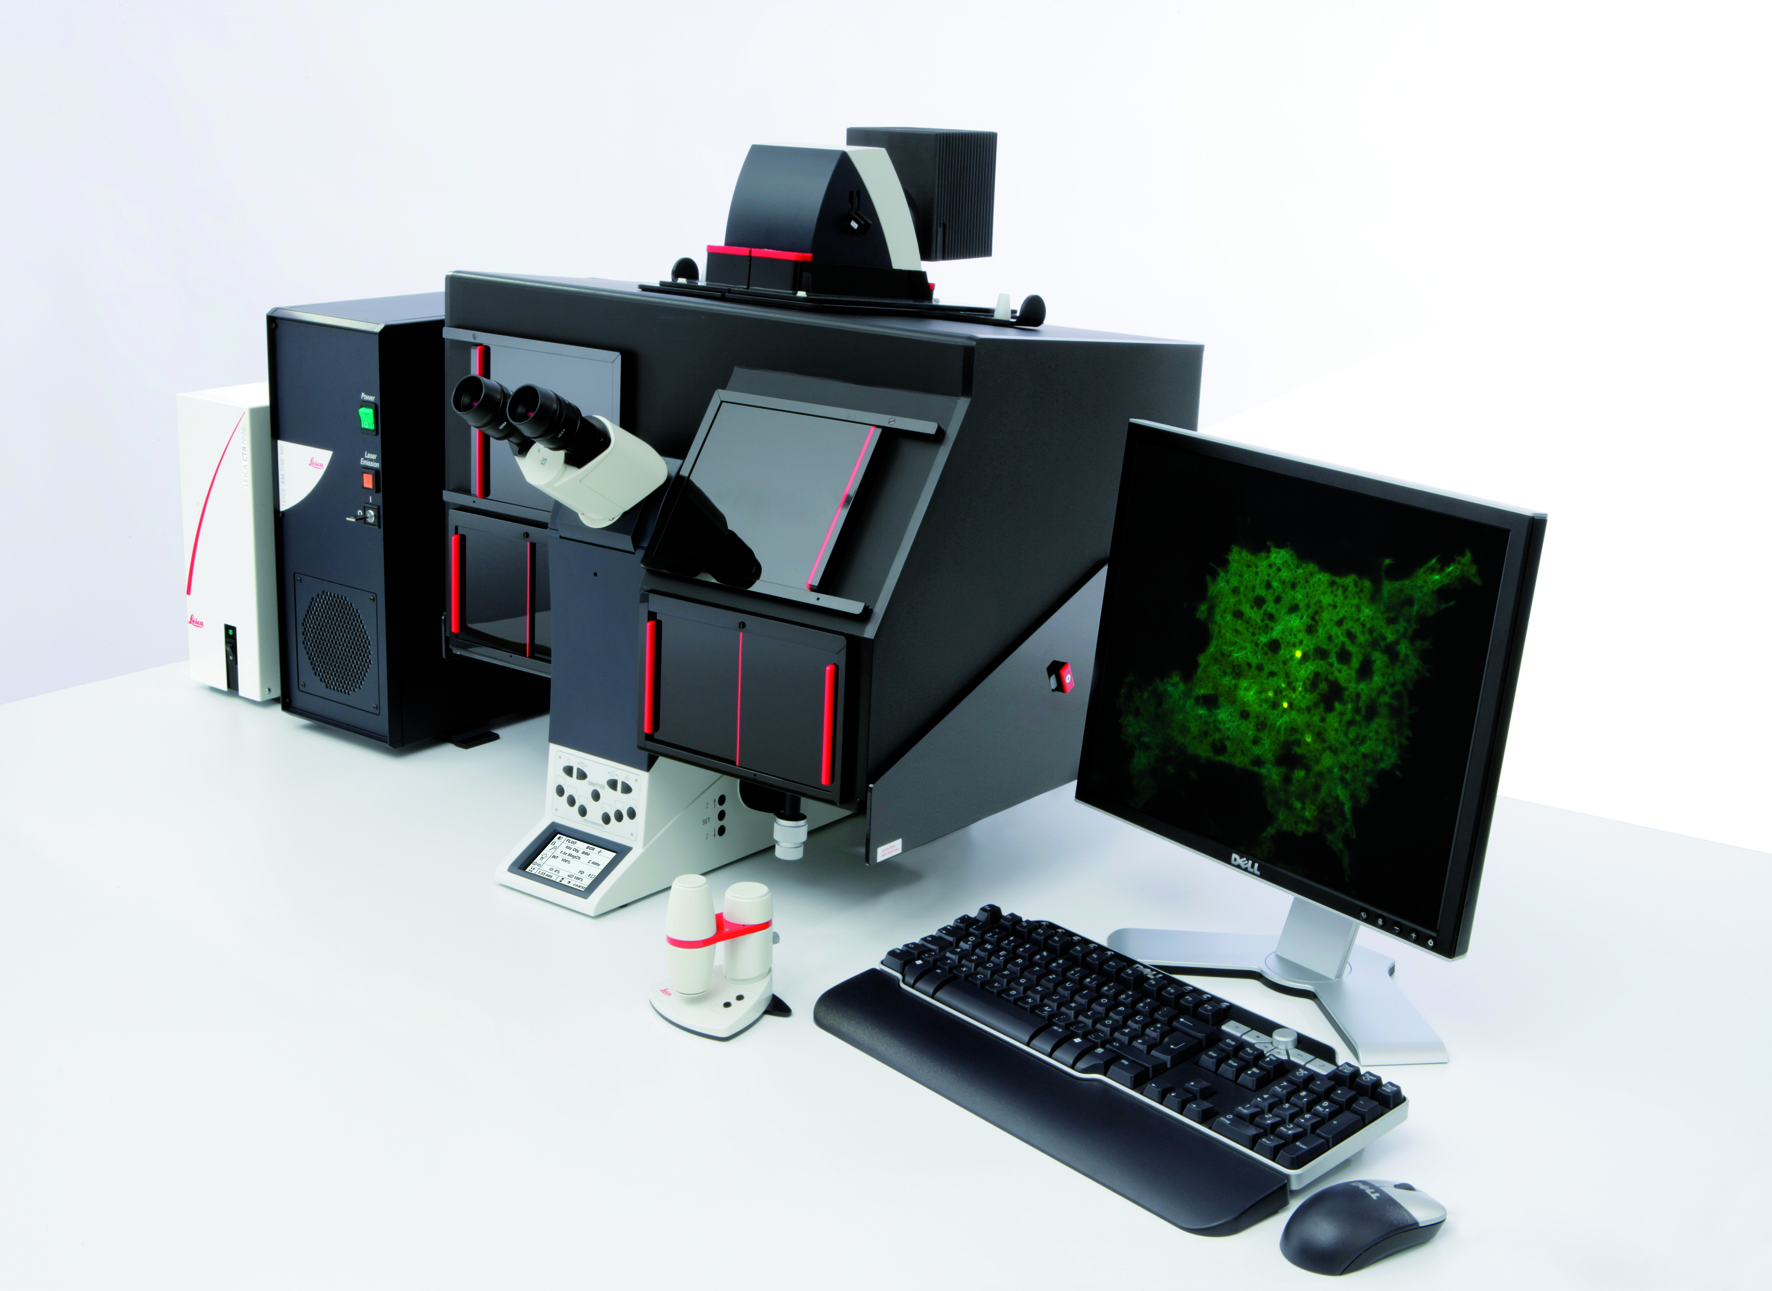 Leica AM TIRF MC provides the highest transmission of all optical TIRF components for maximum TIRF imaging speed and image brilliance.